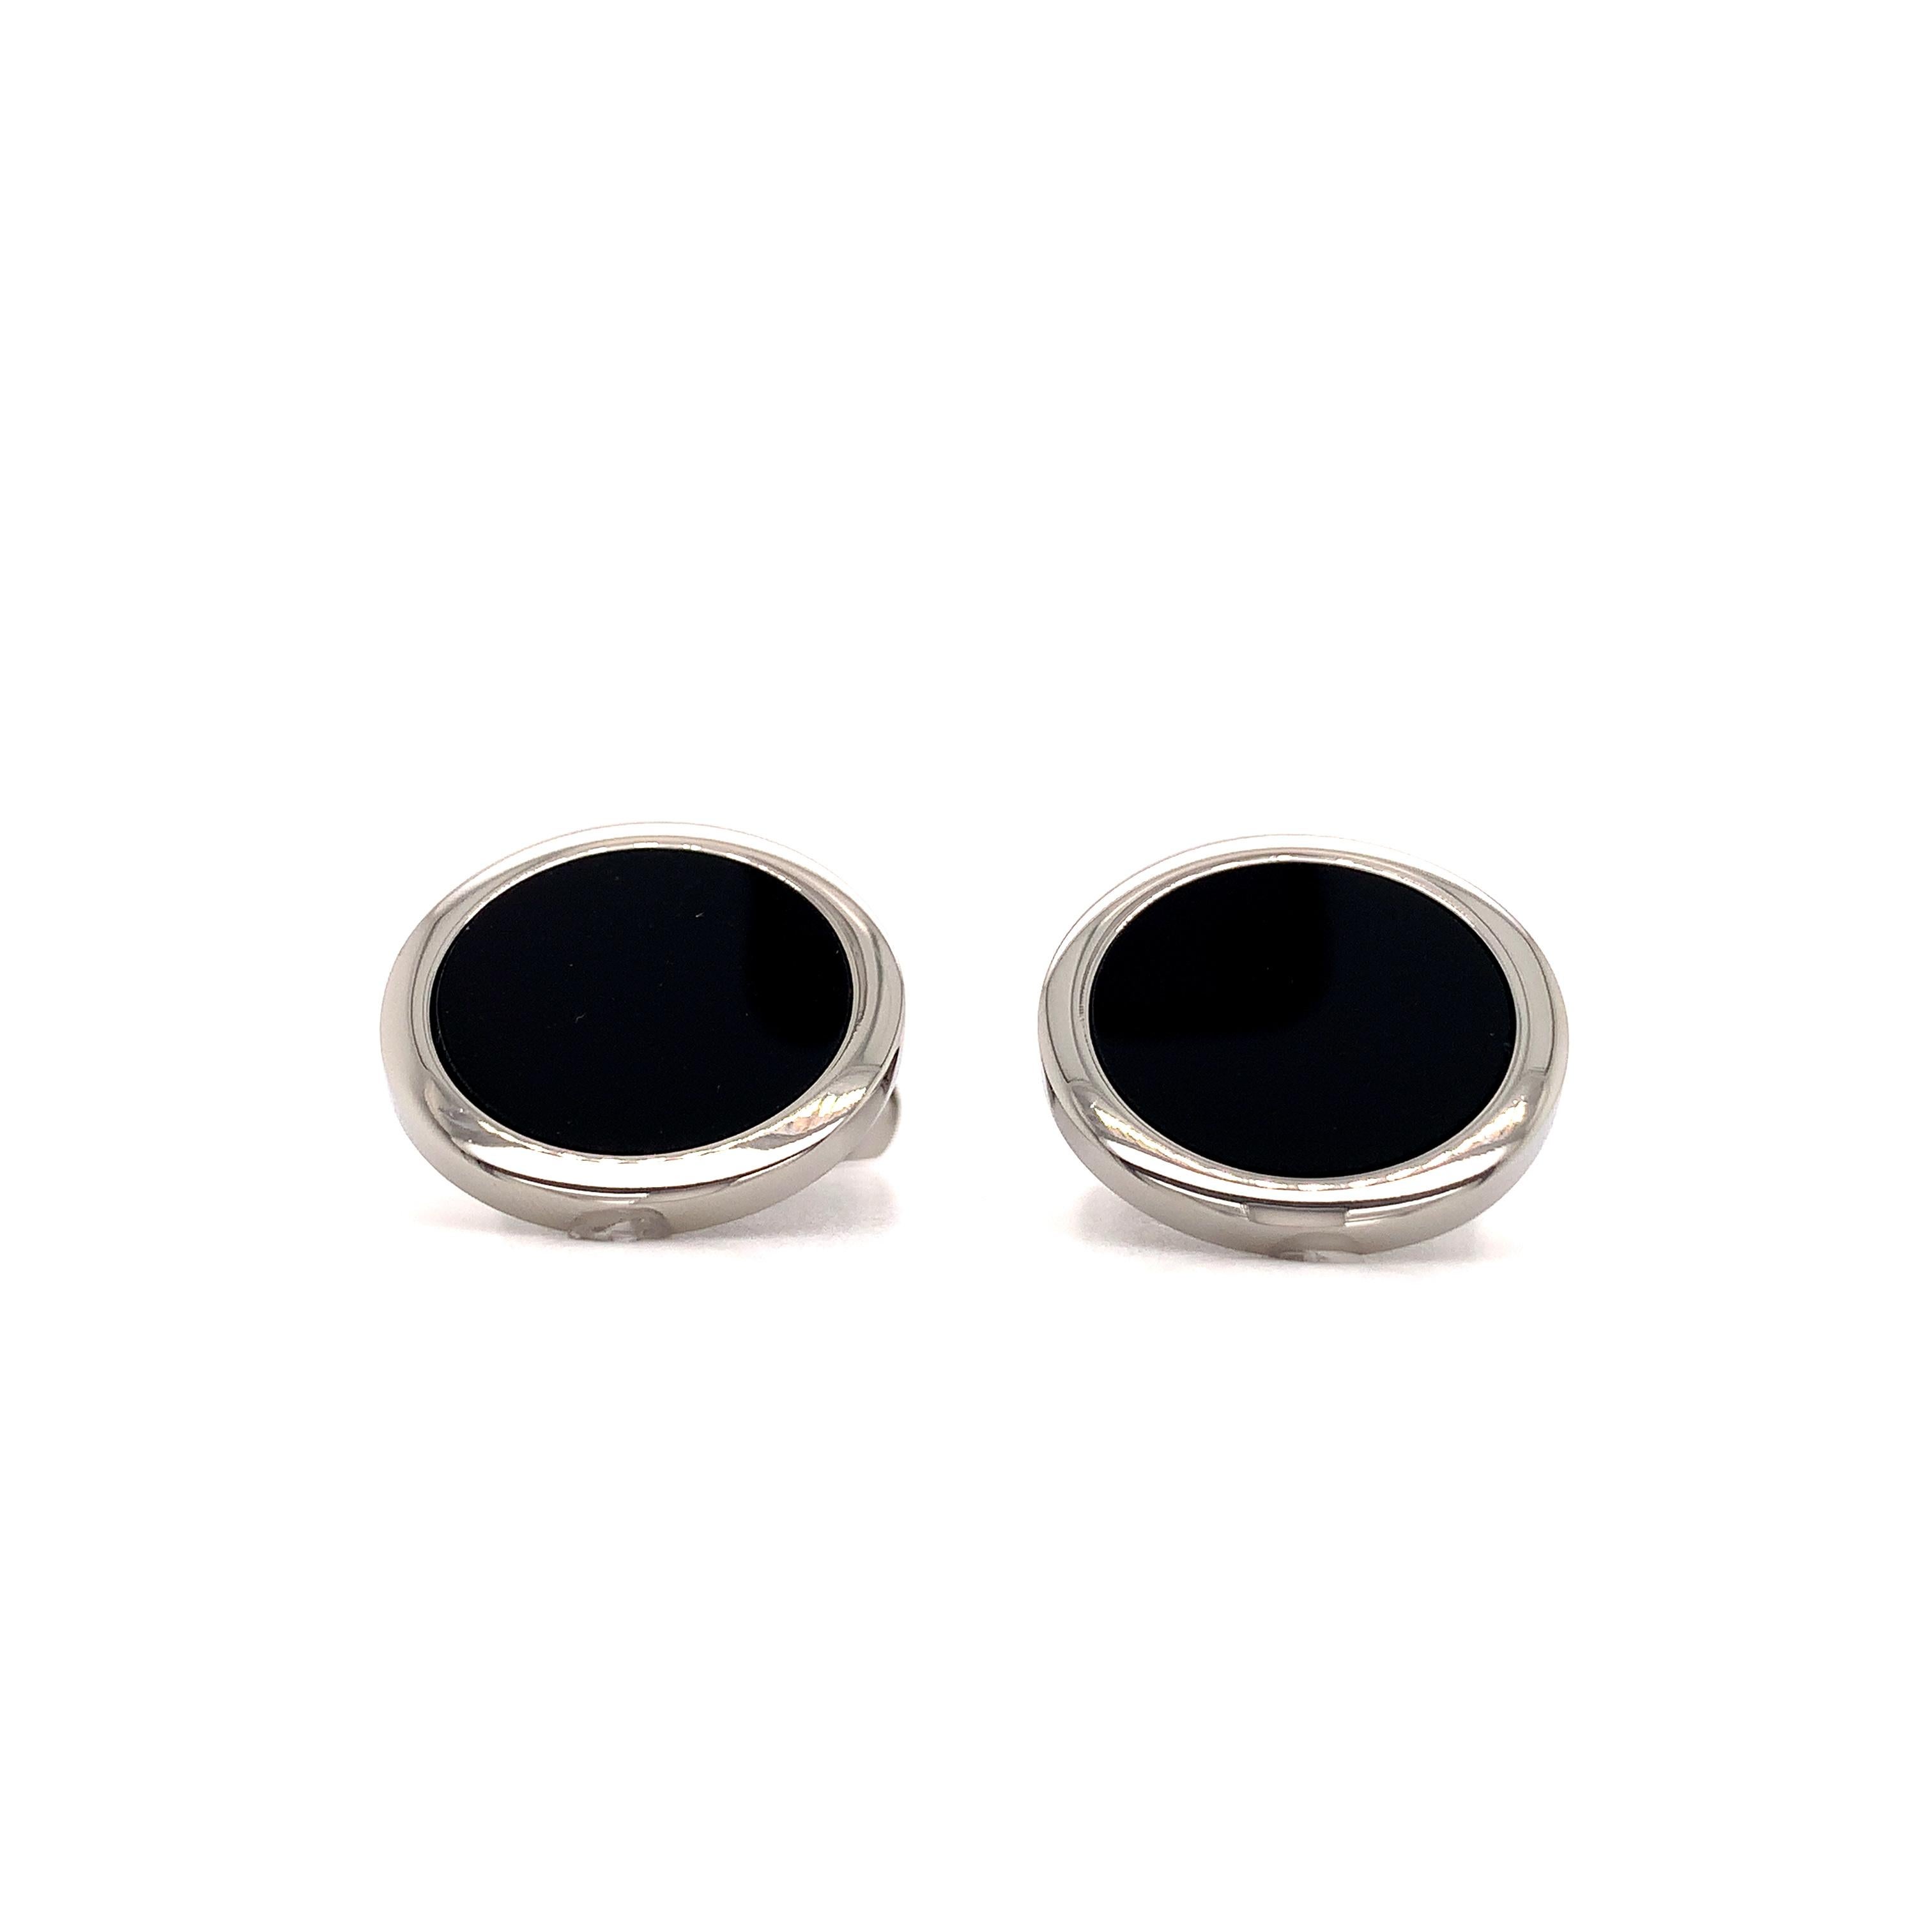 Round Polished Victor Mayer Cufflinks Stainless Steel, Black Onyx, dimensions Ø approx. 19 mm

VICTOR MAYER is a fine jewelry house known for its sophisticated craftsmanship. Since 1989, the company has been closely associated with the Fabergé name